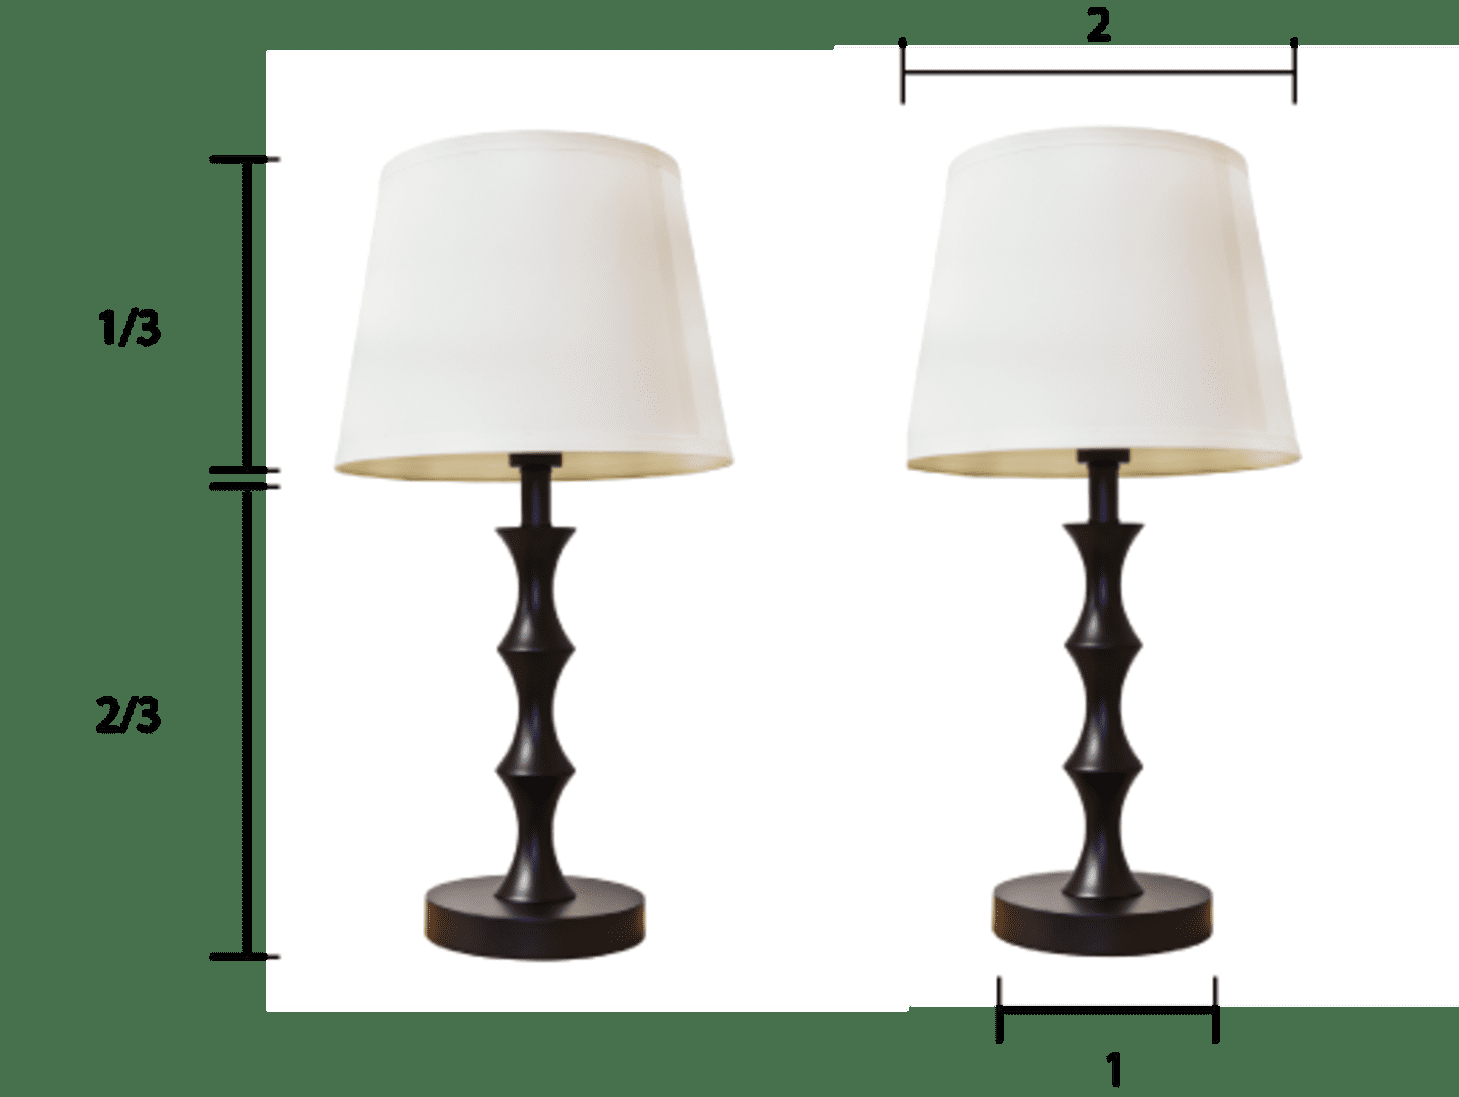 How To Choose the Right Size Lamp Shade - How To Choose the Right Size Lamp Shade -   15 diy Lamp de chevet ideas